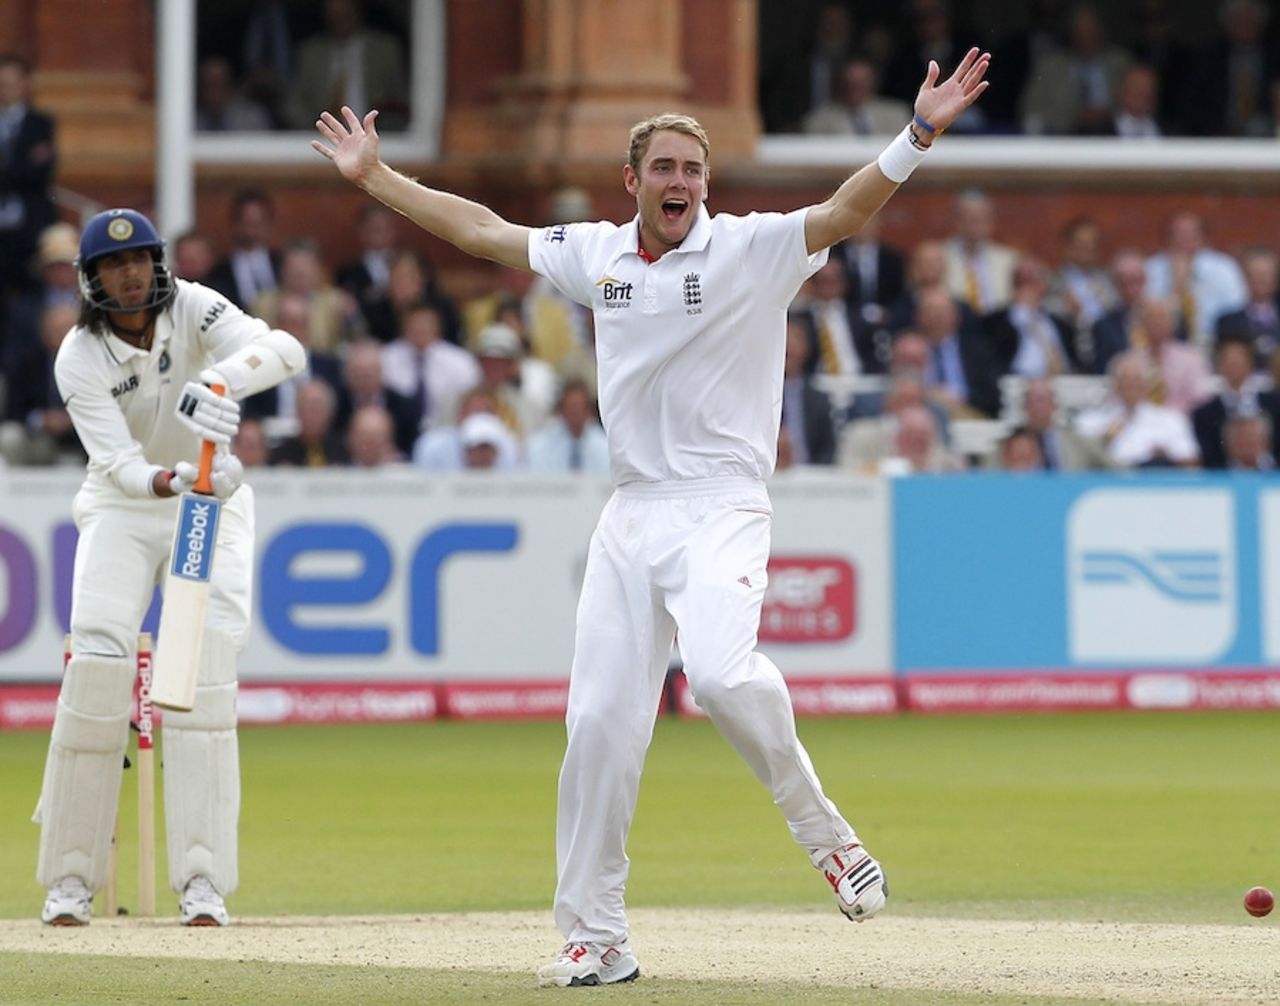 Stuart Broad secures England's win by dismissing Ishant Sharma, England v India, 1st Test, Lord's, 5th day, July 25, 2011